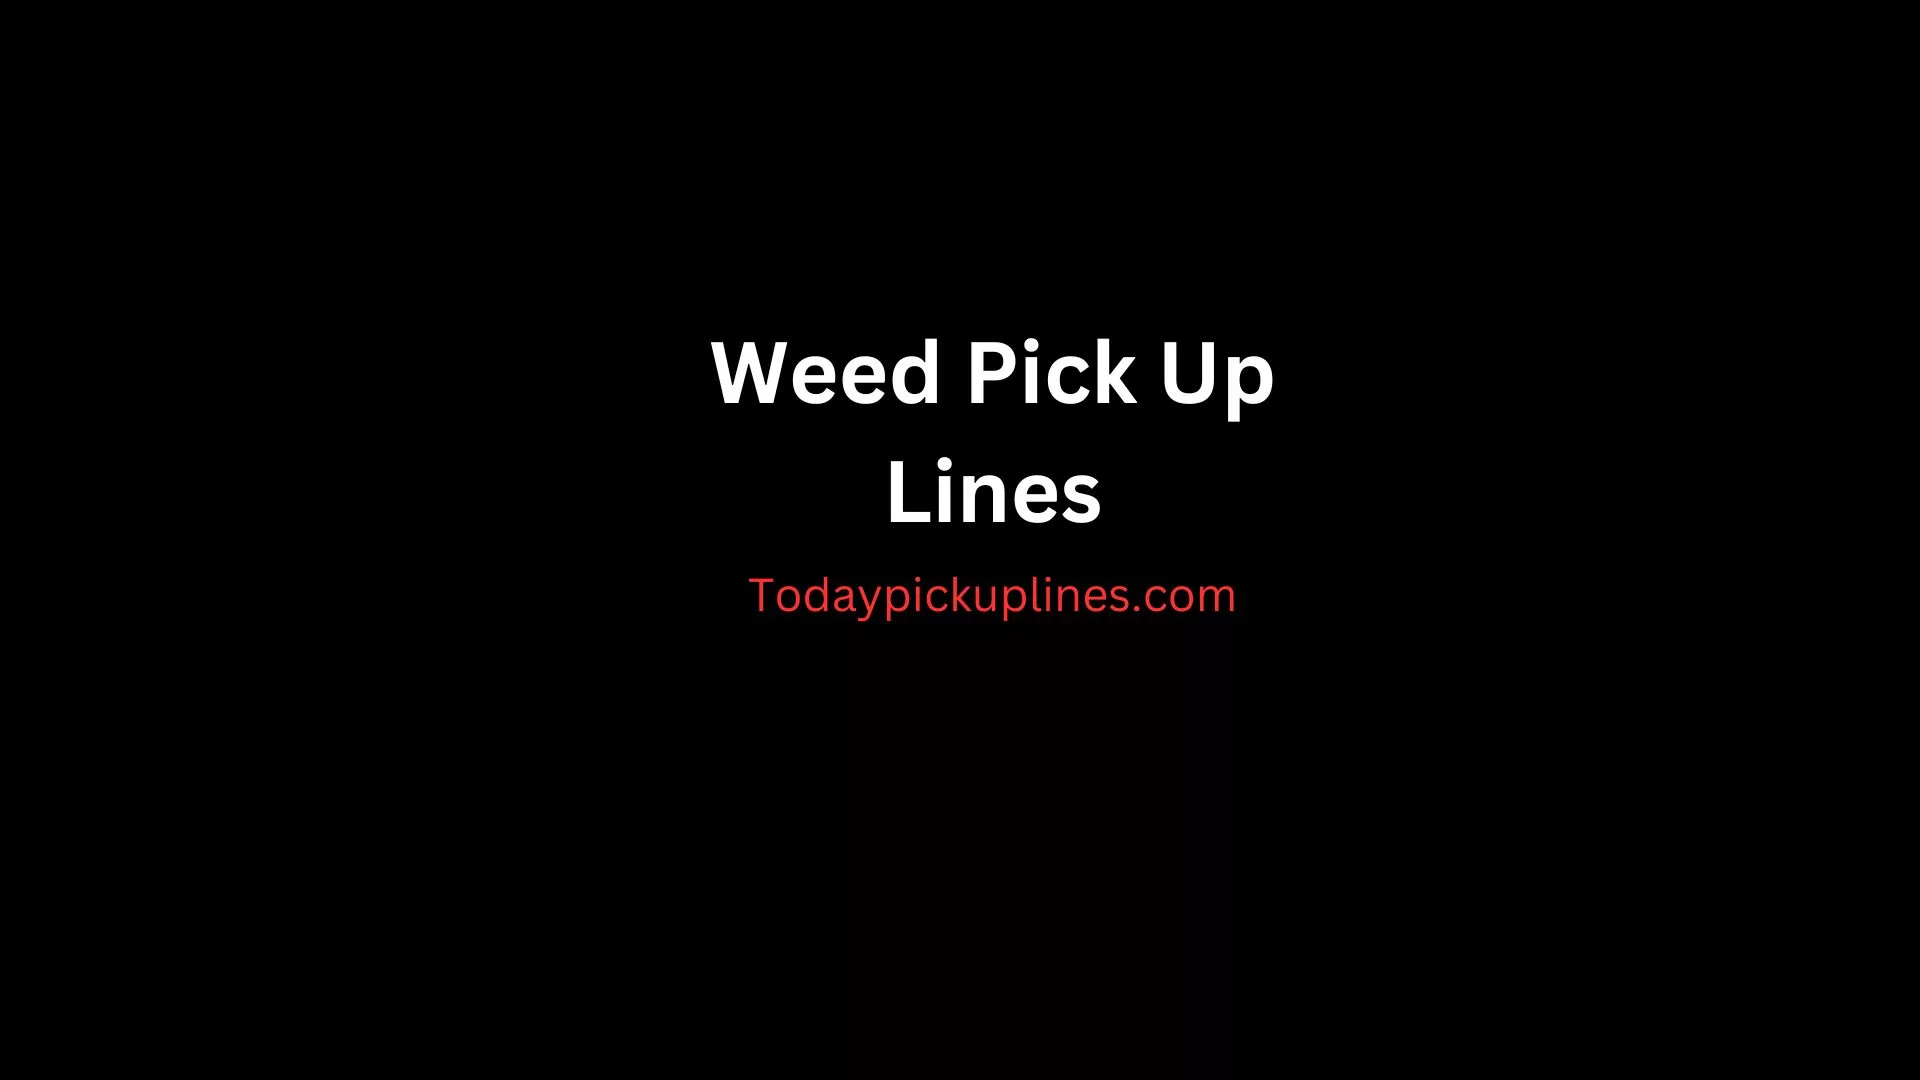 Weed Pick Up Lines